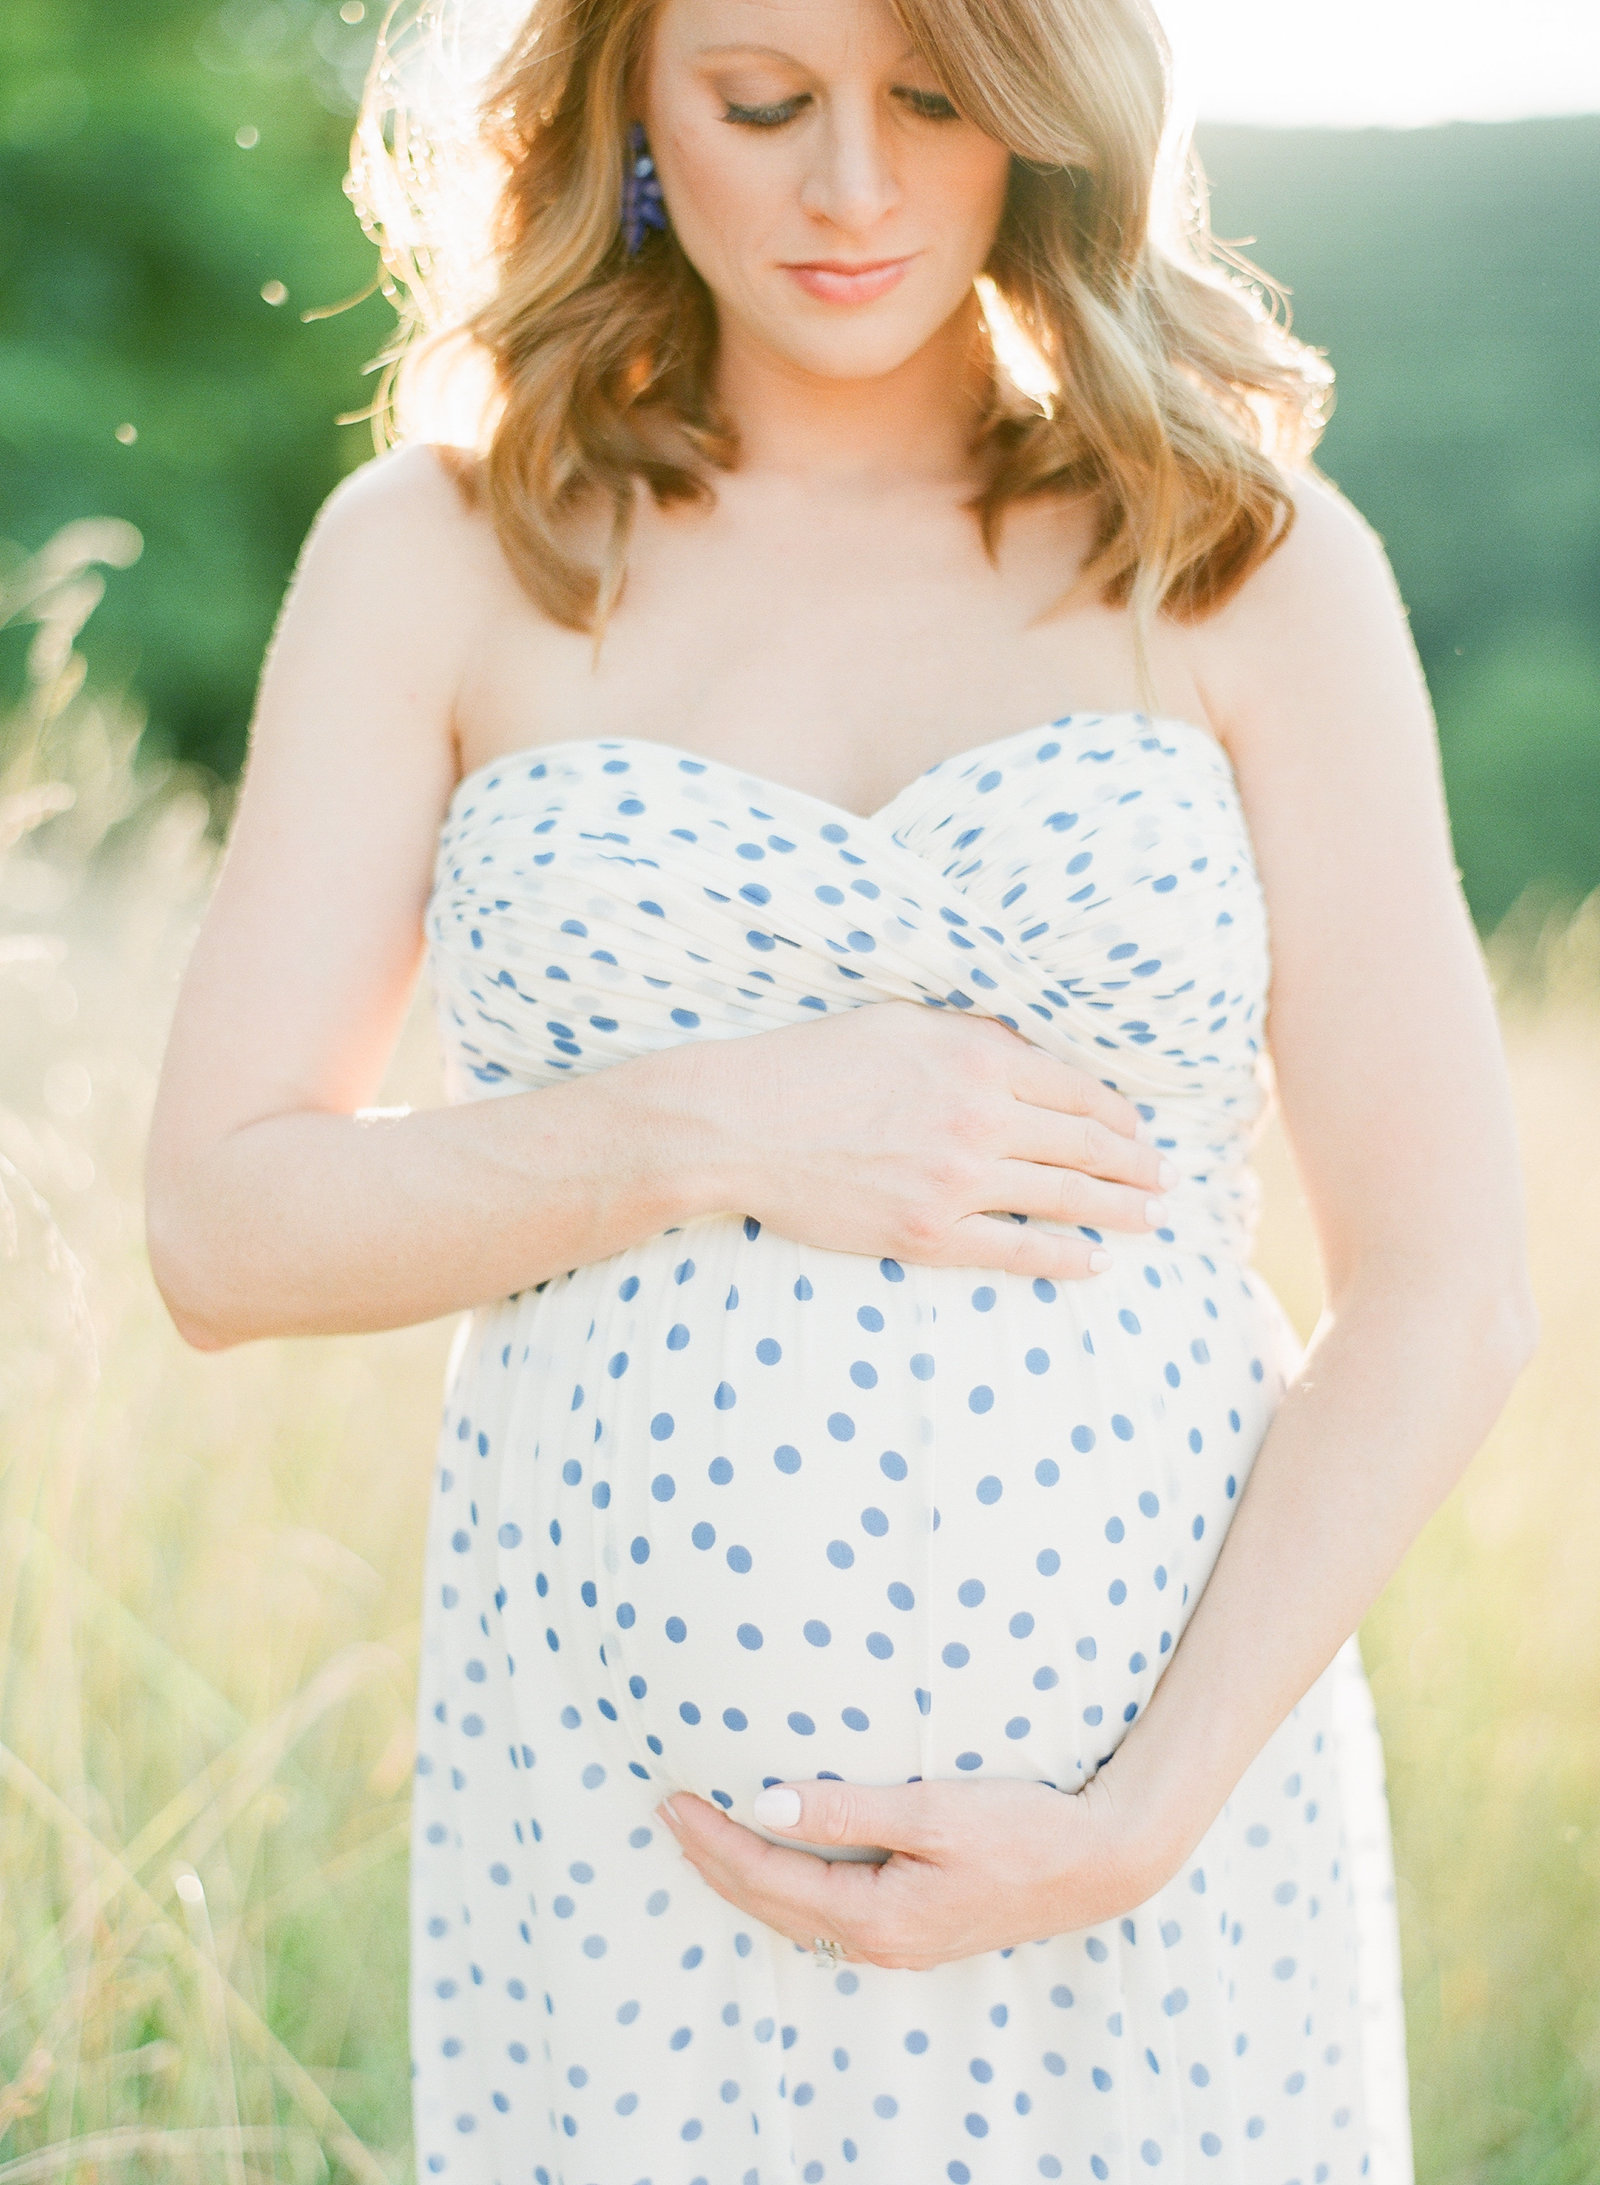 Kerry Jack Maternity Session-Maternity Session-0198